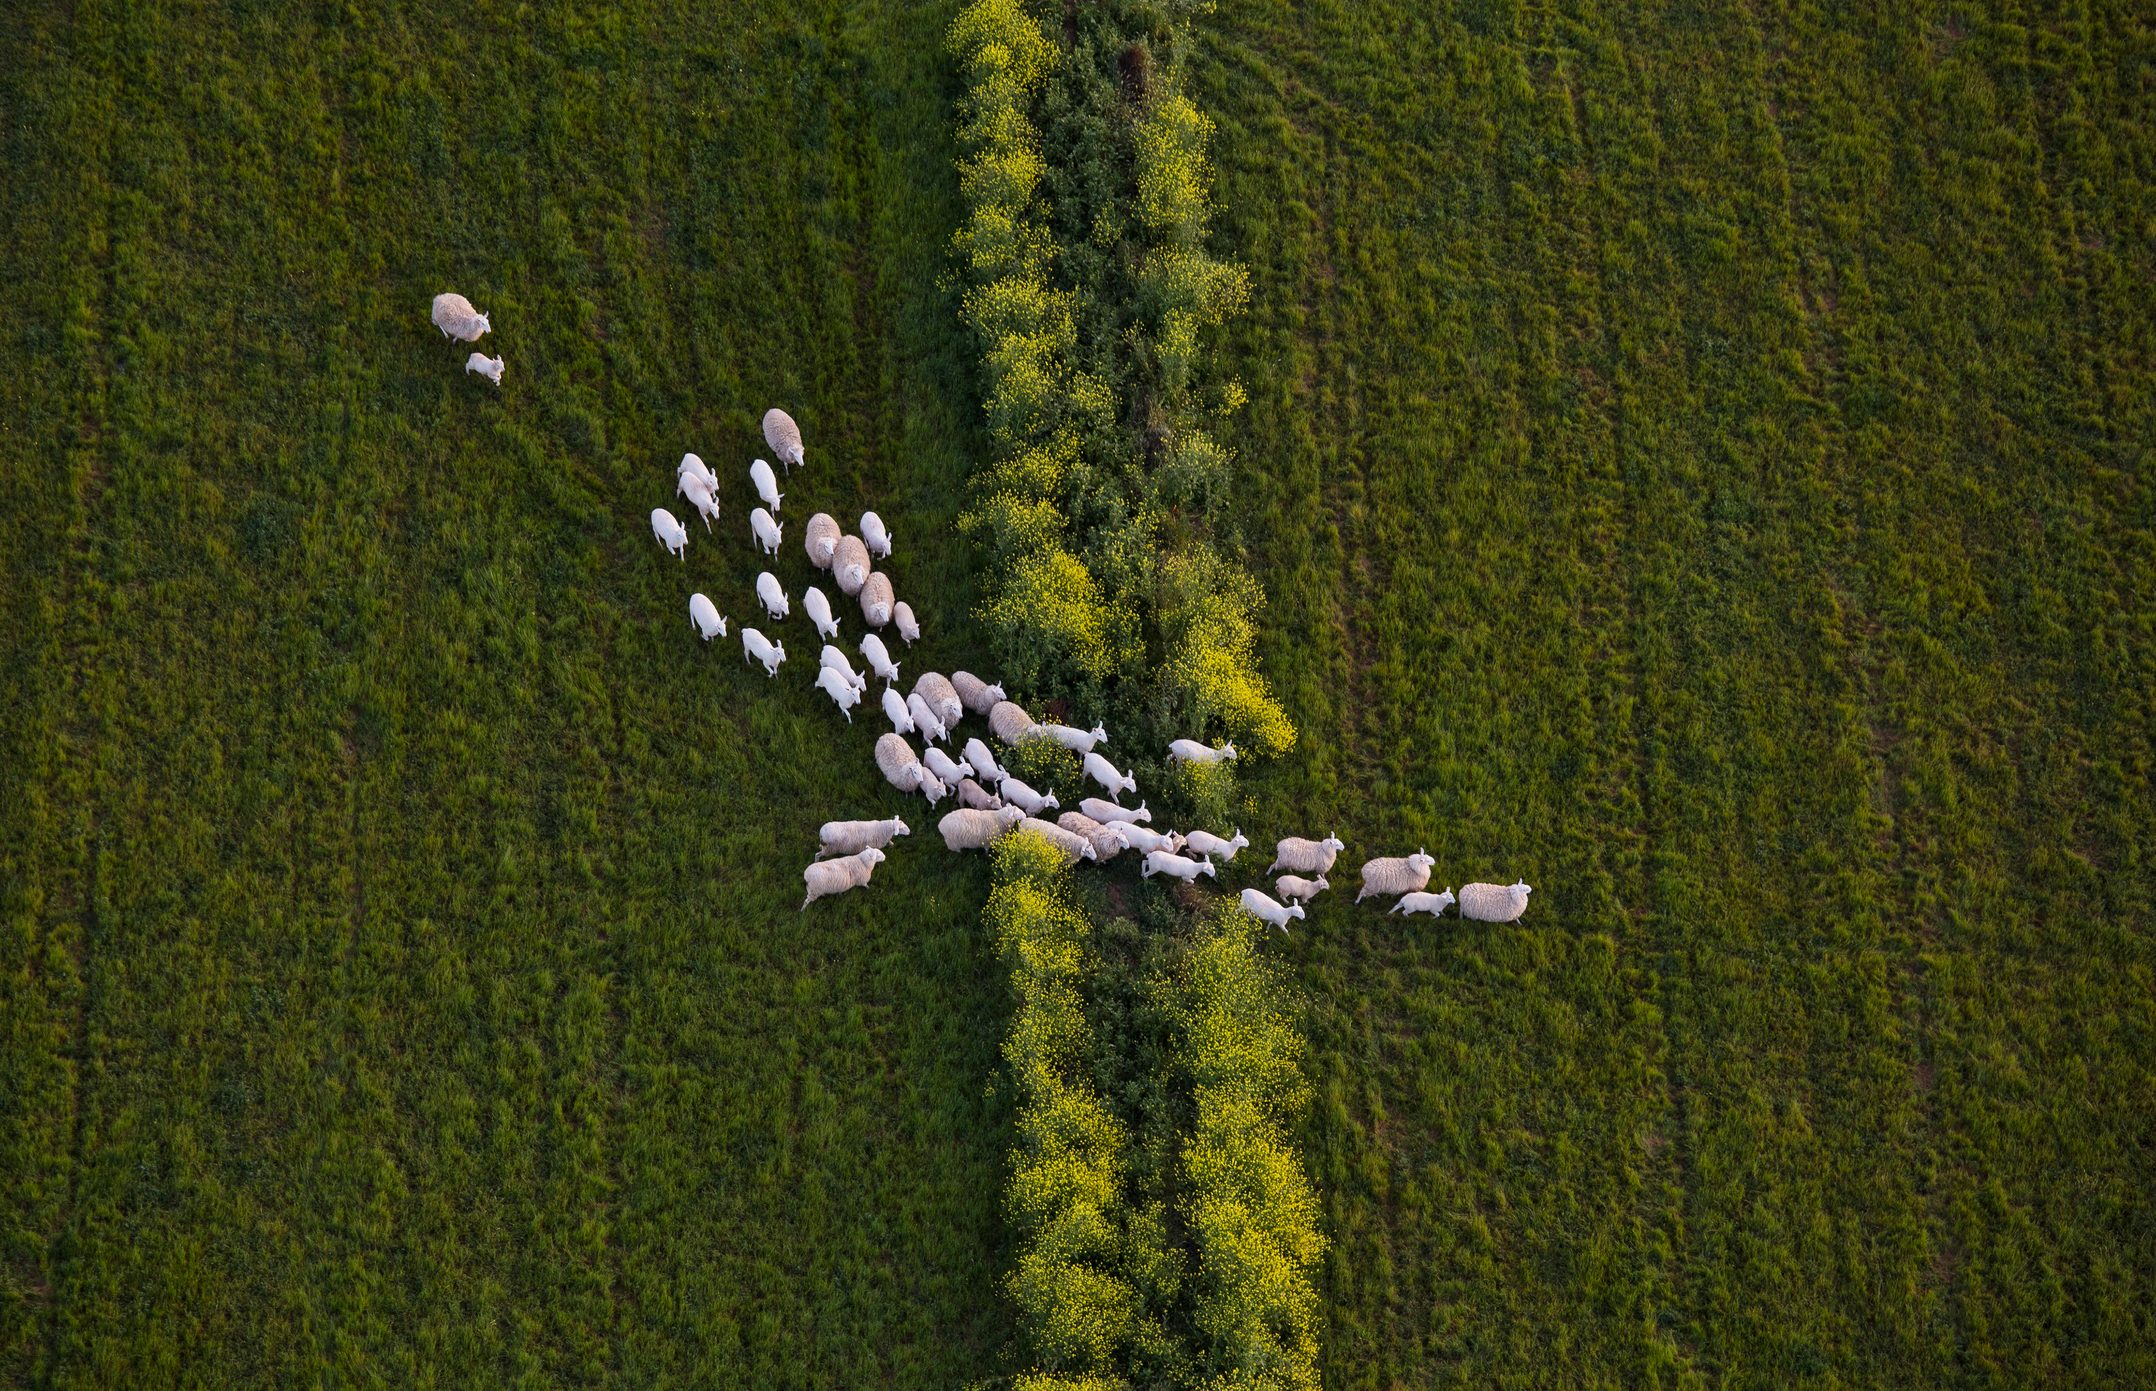 Directly above shot of sheep walking on grassy field